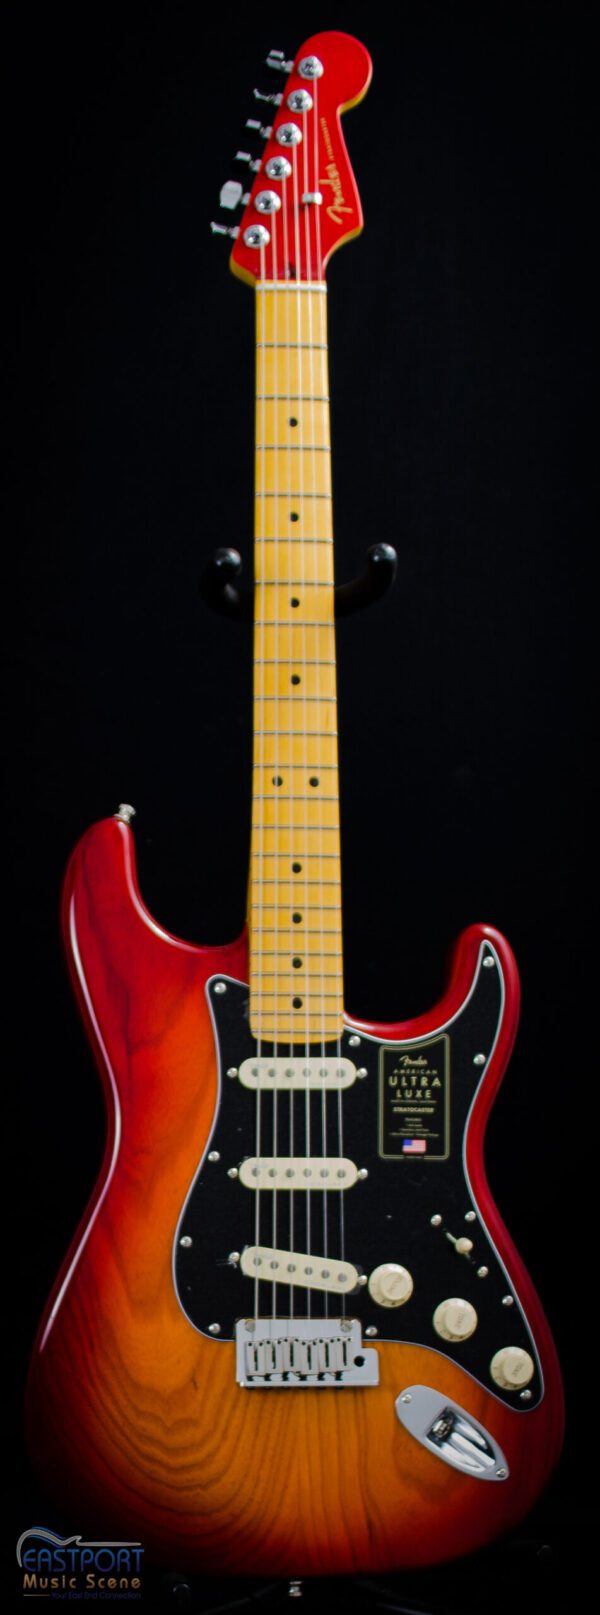 A red and yellow electric guitar is on display.